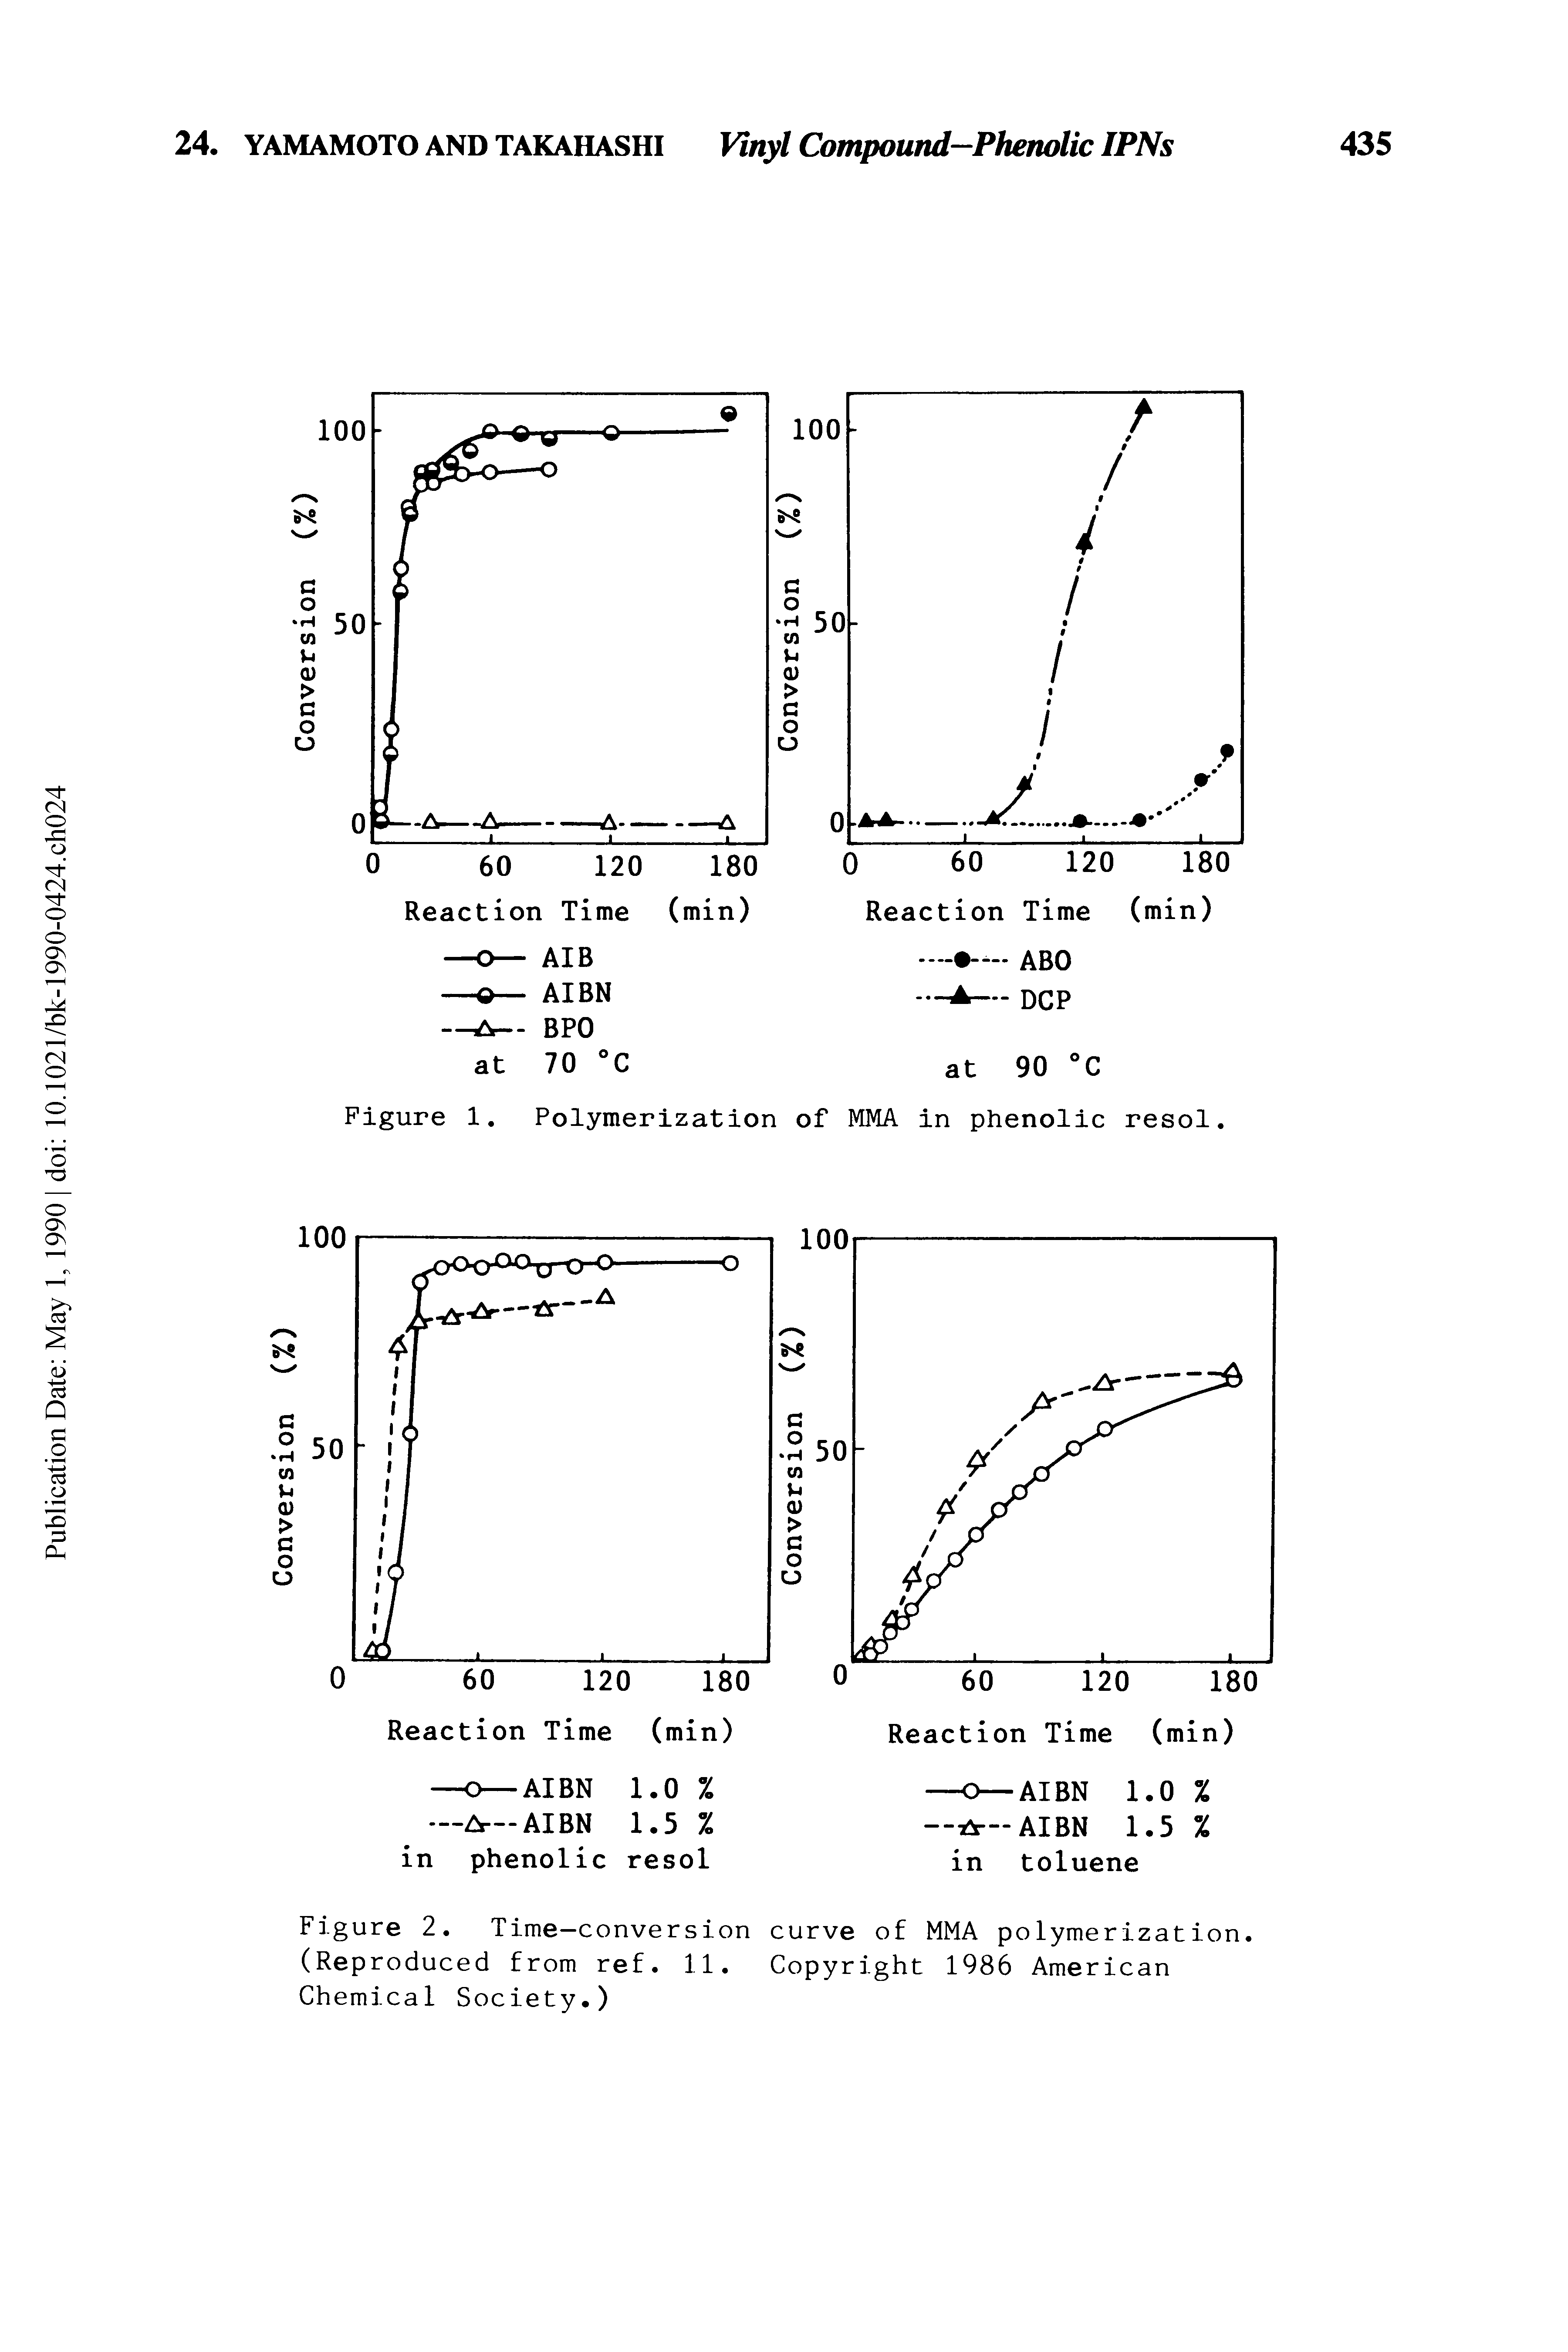 Figure 2. Time-conversion curve of MMA polymerization. (Reproduced from ref. 11. Copyright 1986 American Chemical Society.)...